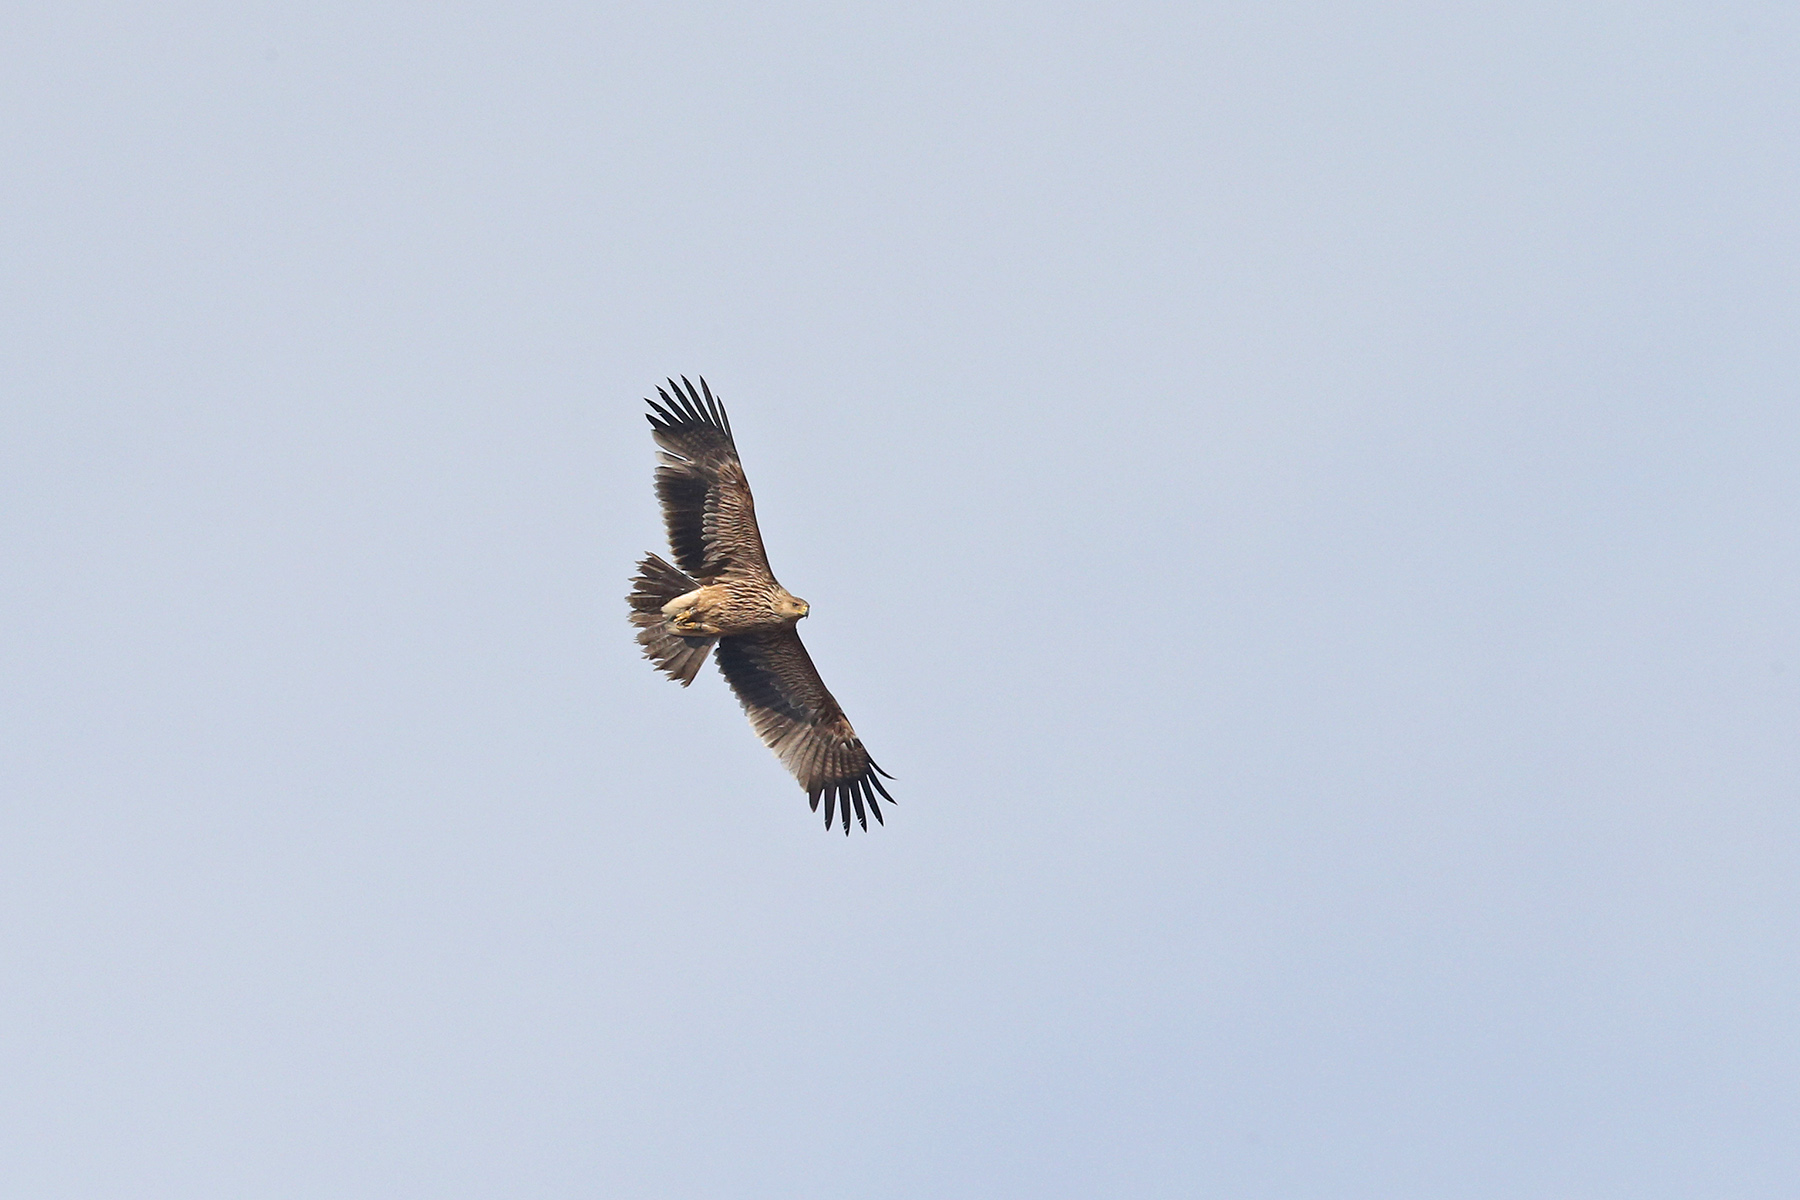 Eastern Imperial Eagle in Hungary (image by János Oláh)